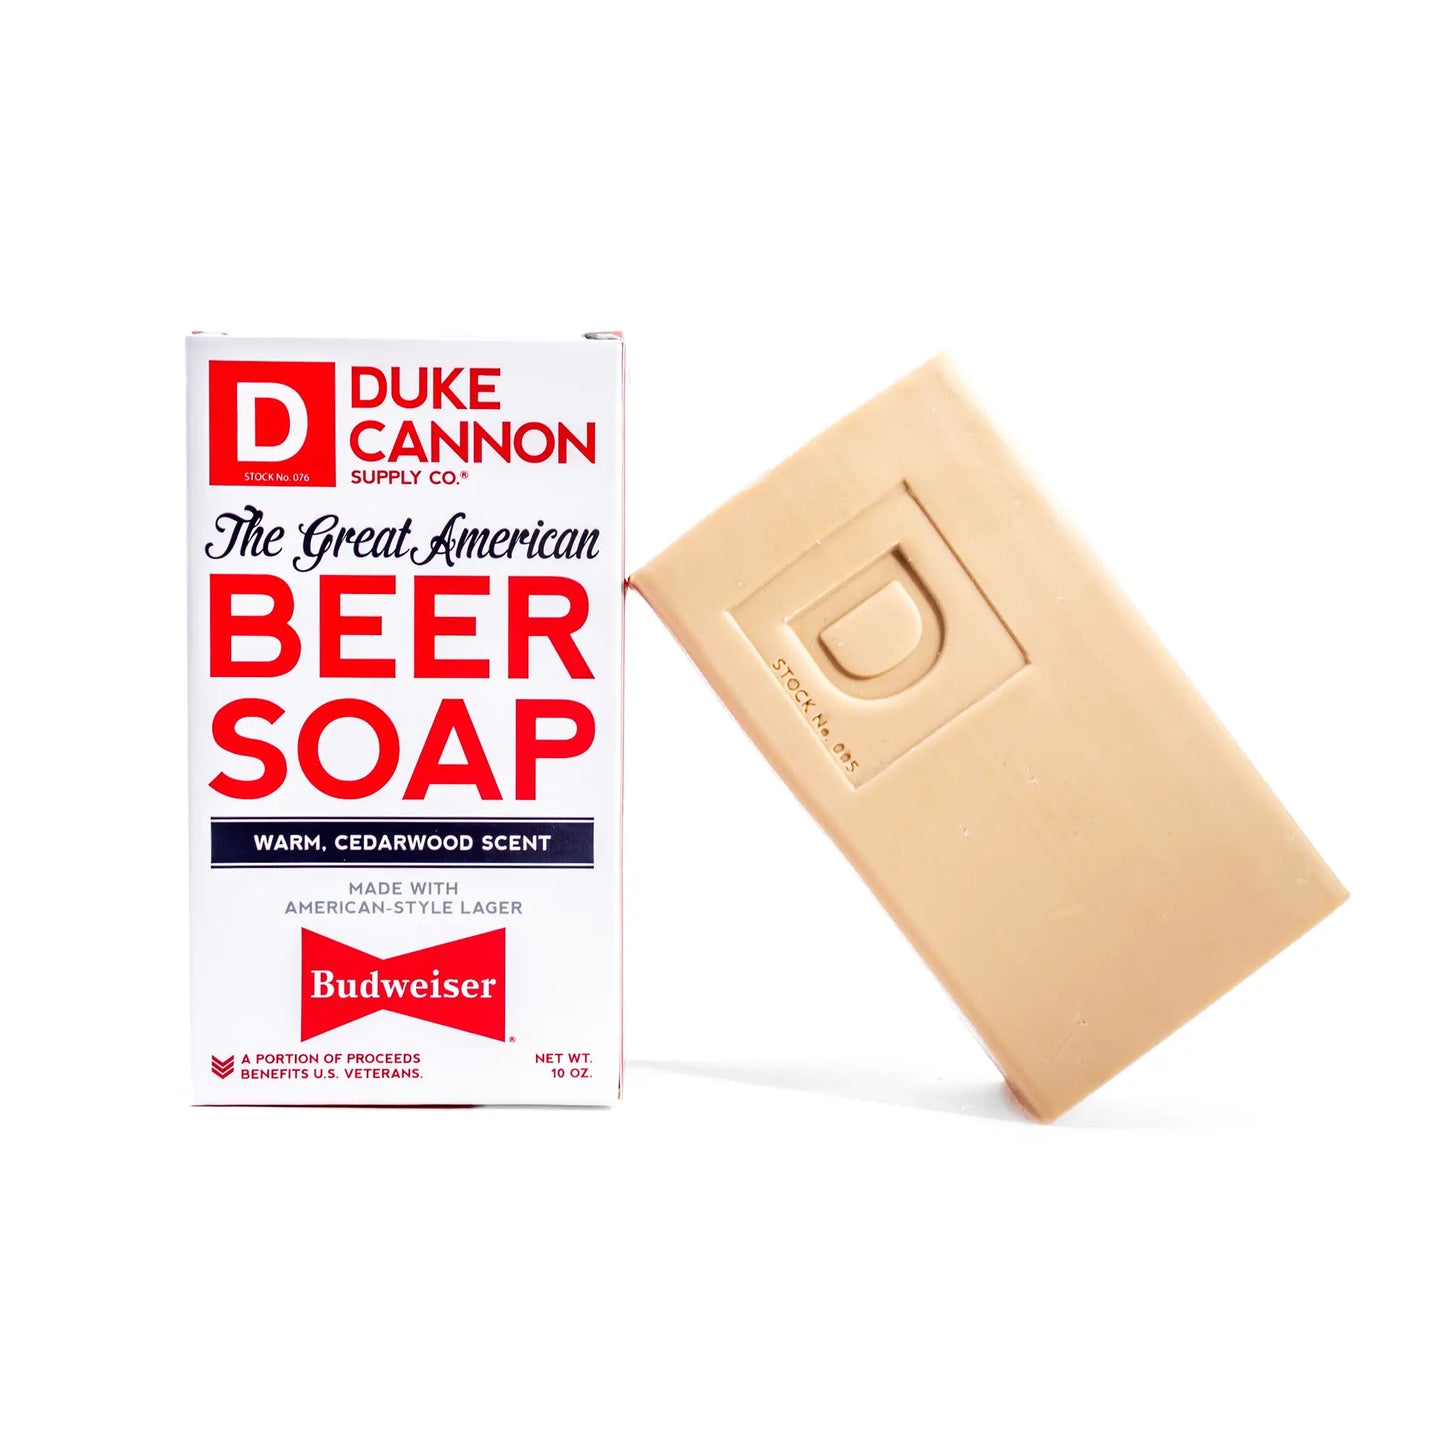 The Great American Budweiser Beer Soap - Duke Cannon Soap Bar